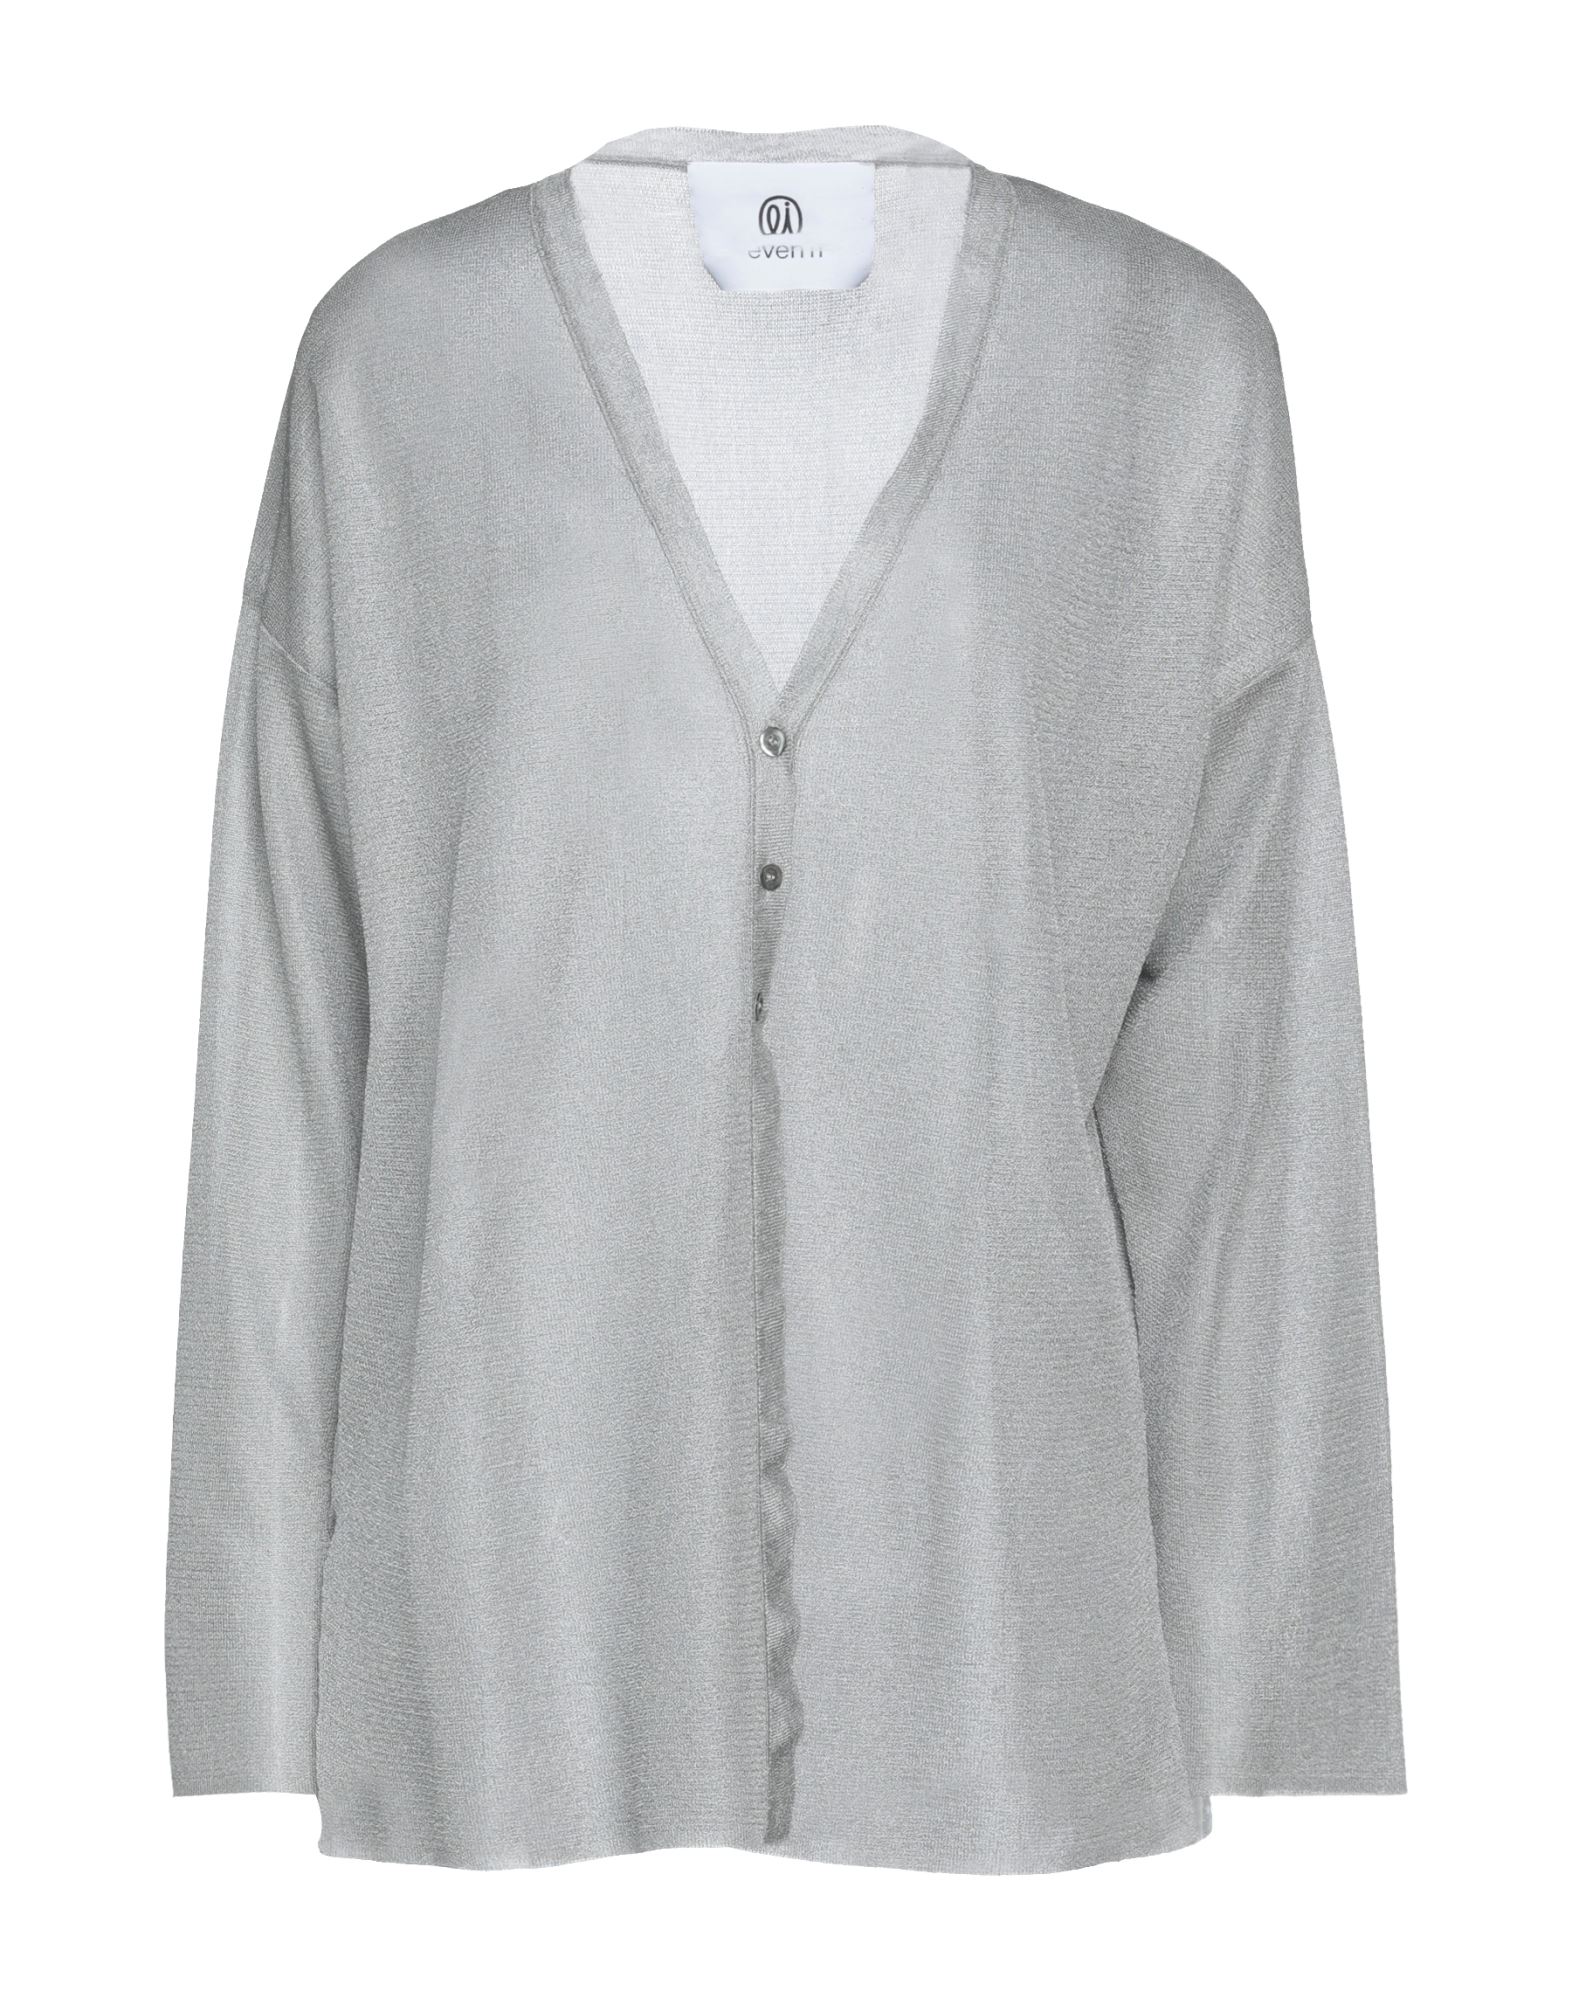 Shop Even If Woman Cardigan Light Grey Size L Viscose, Polyester